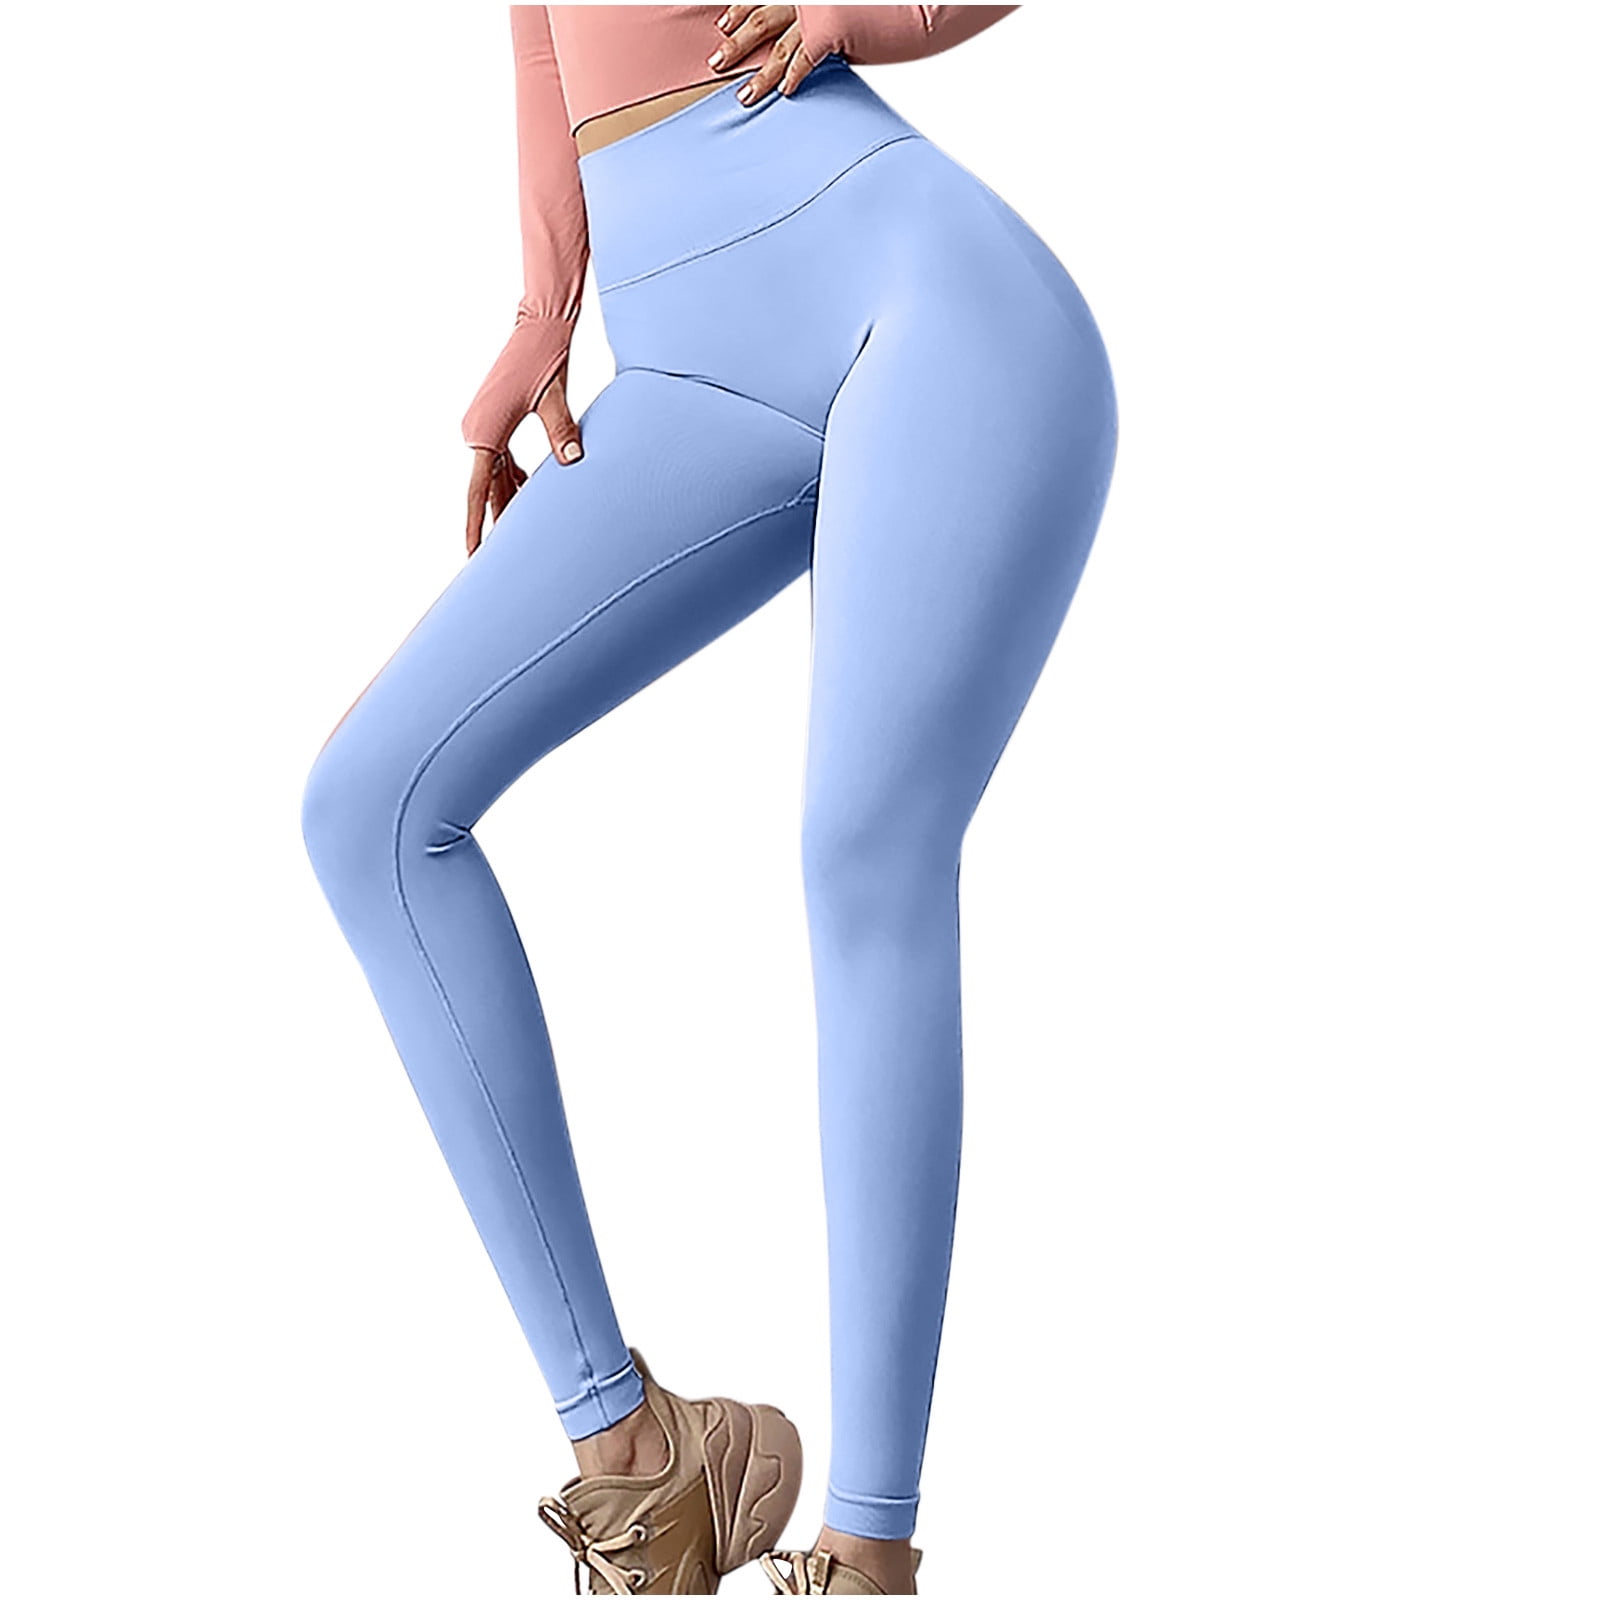 Ernkv Women's Pants Solid Color Fashion Full Length Trousers Comfy Lounge  Casual Yoga Pants For Lady Wife Daughter Girlfriend Sky Blue M